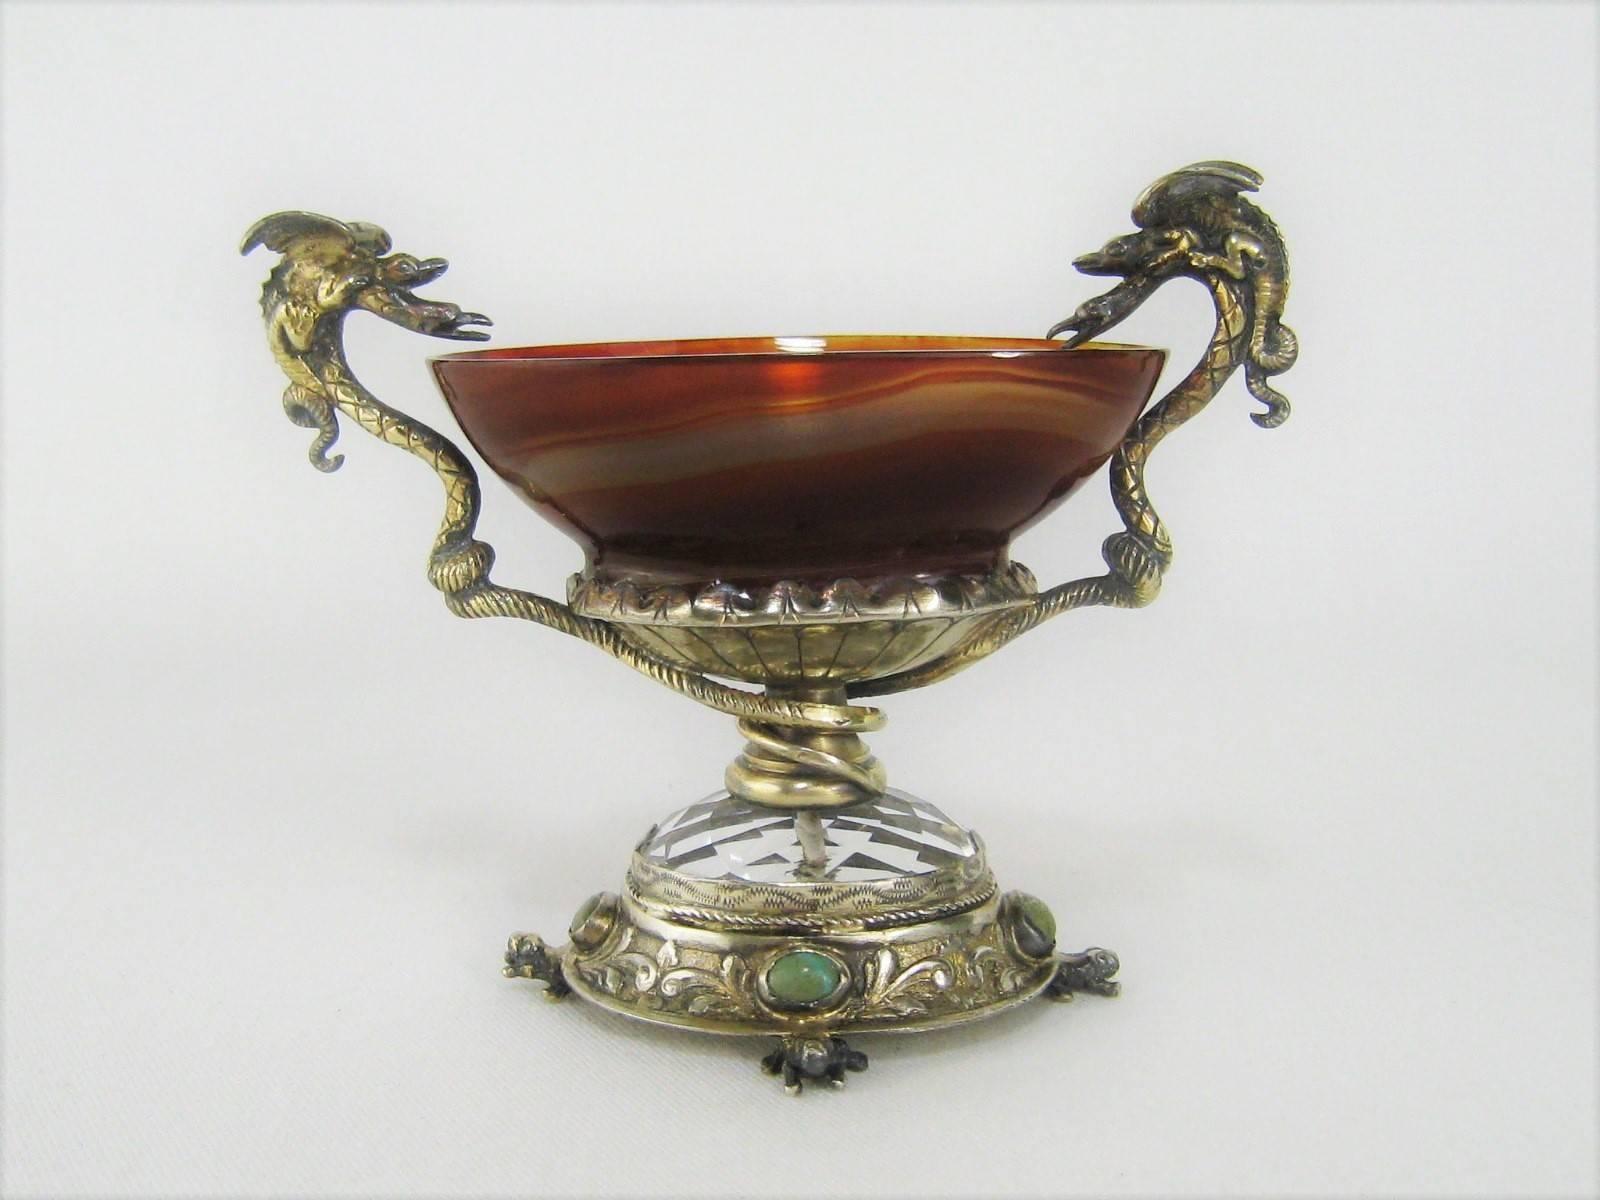 German Silver Mounted Agate Pedestal Dish with Serpents and Frogs Antique Salt Cellar For Sale